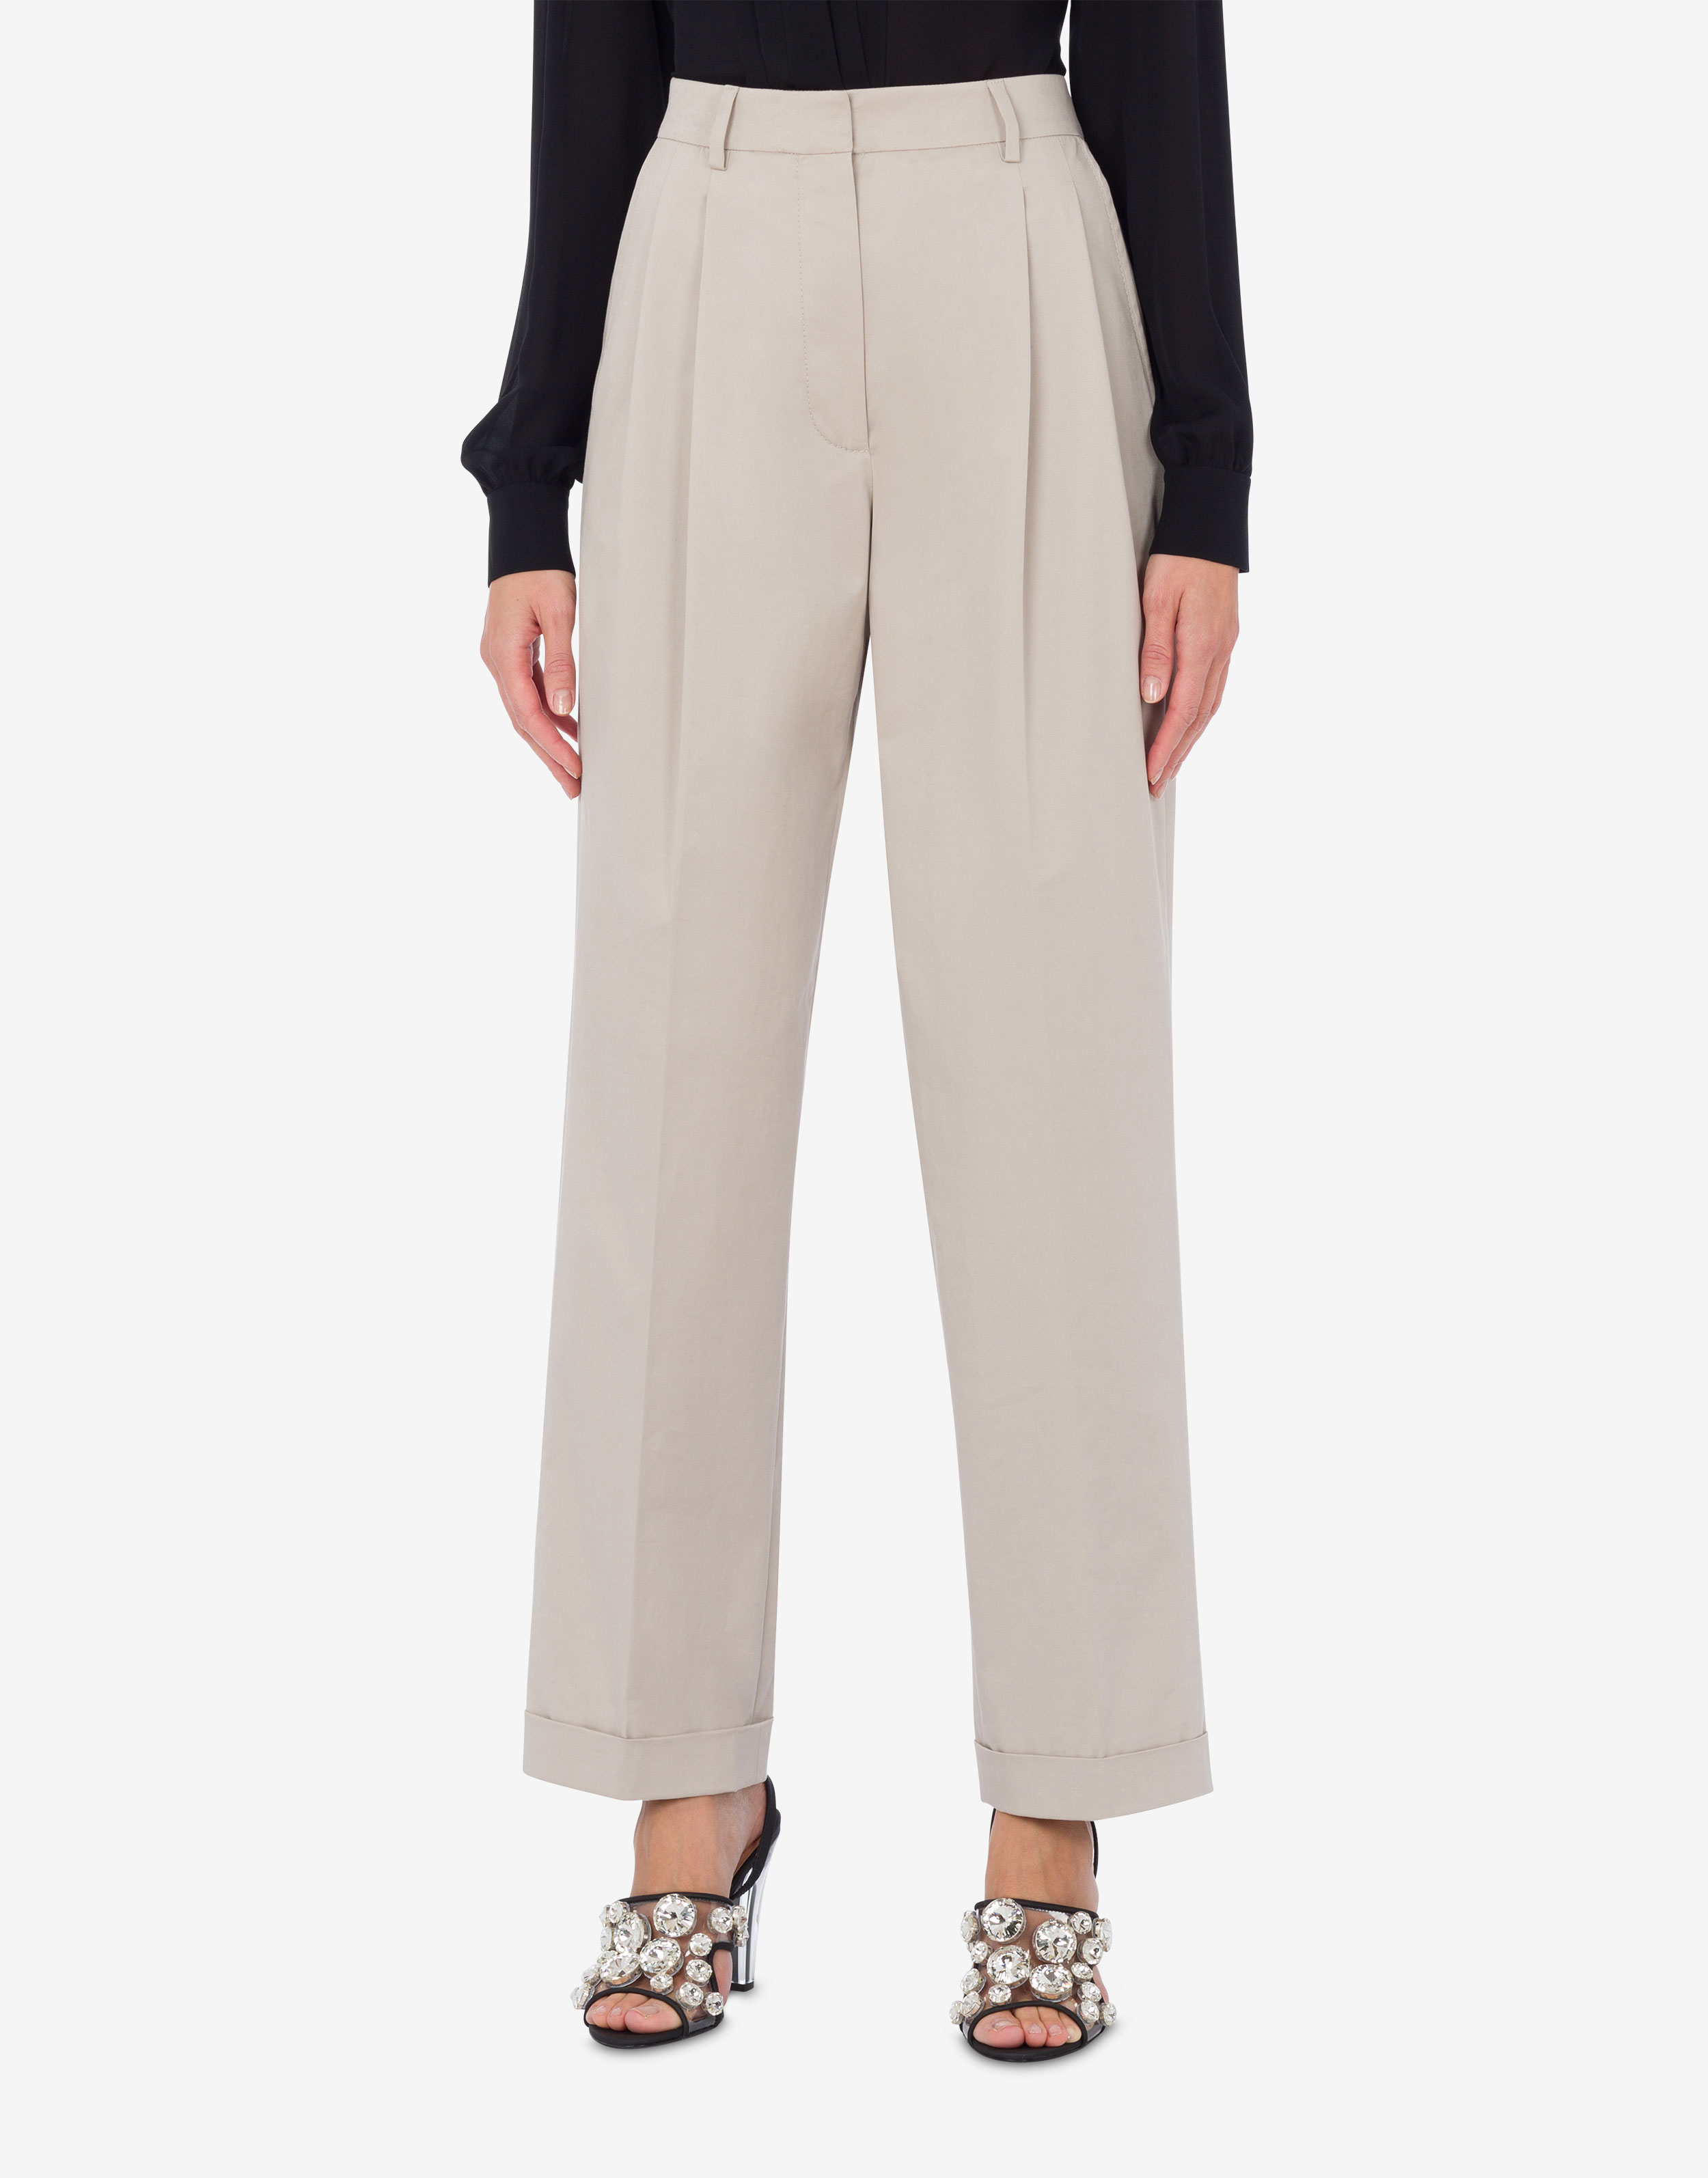 MM6 Light Brown Cotton Tailored Trousers. | COLOGNESE 1882